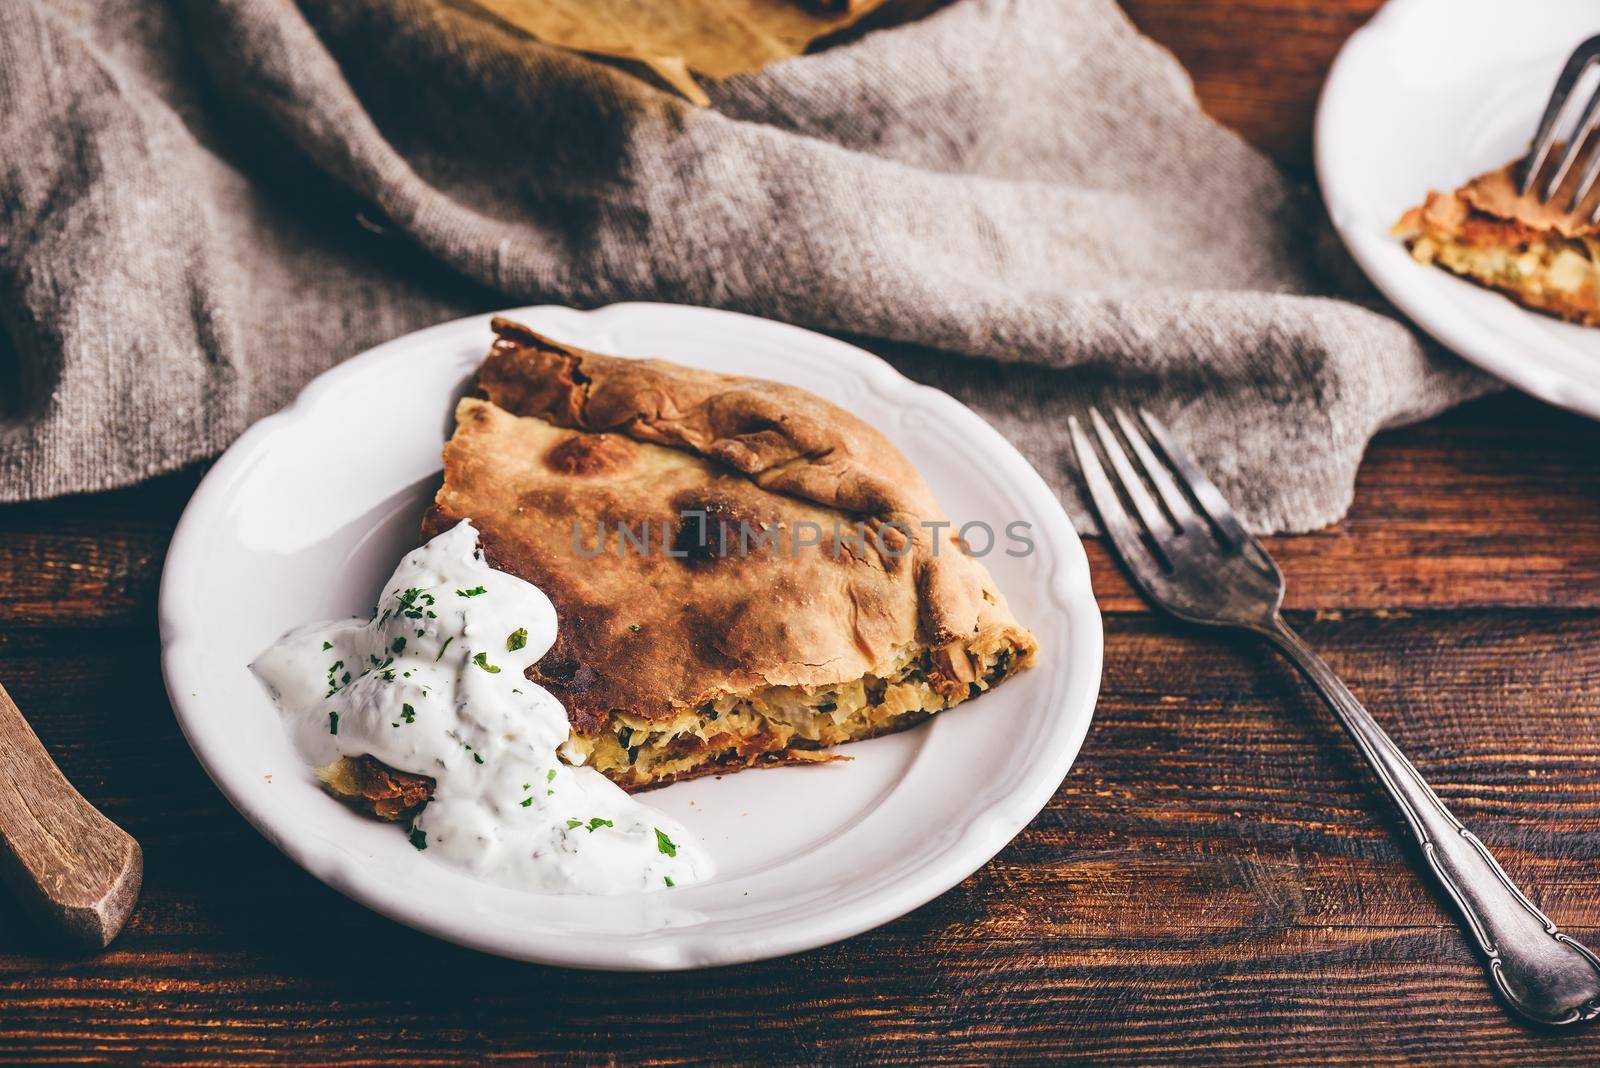 Slice of cabbage pie with sour cream sauce by Seva_blsv